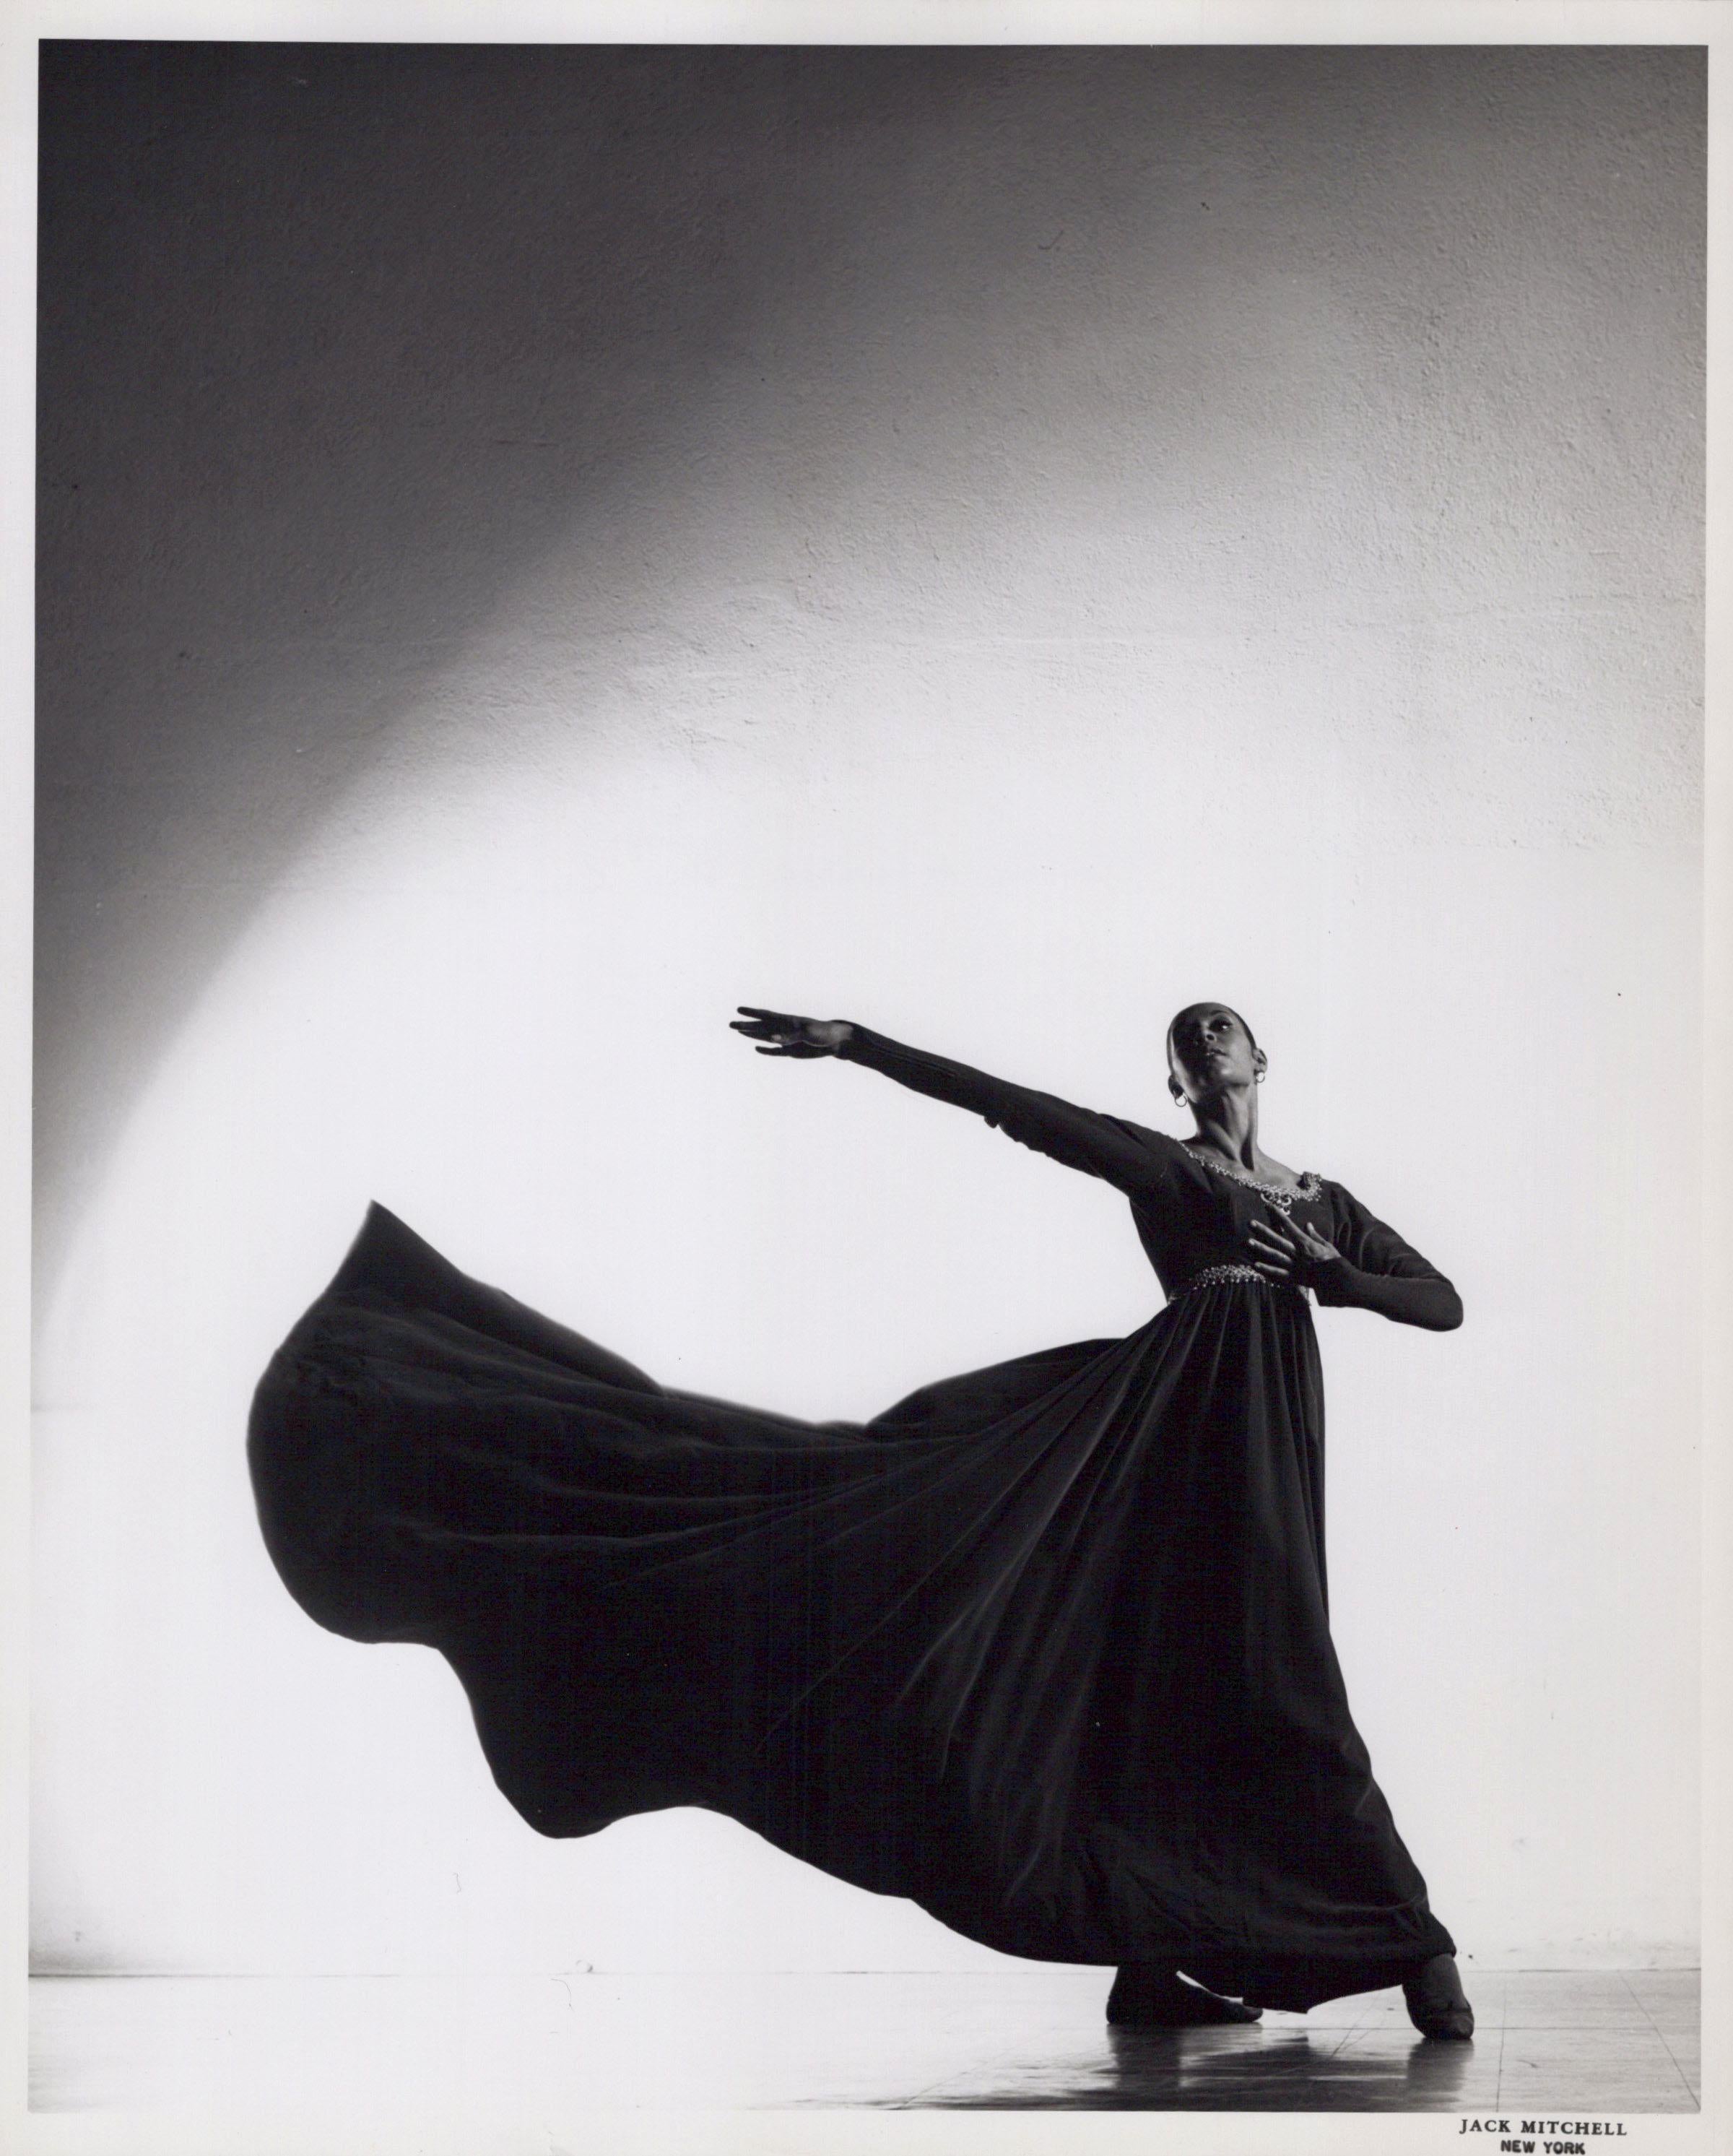 Jack Mitchell Black and White Photograph - Dancer Carmen de Lavallade in Alvin Ailey's 'The Roots of the Blues'